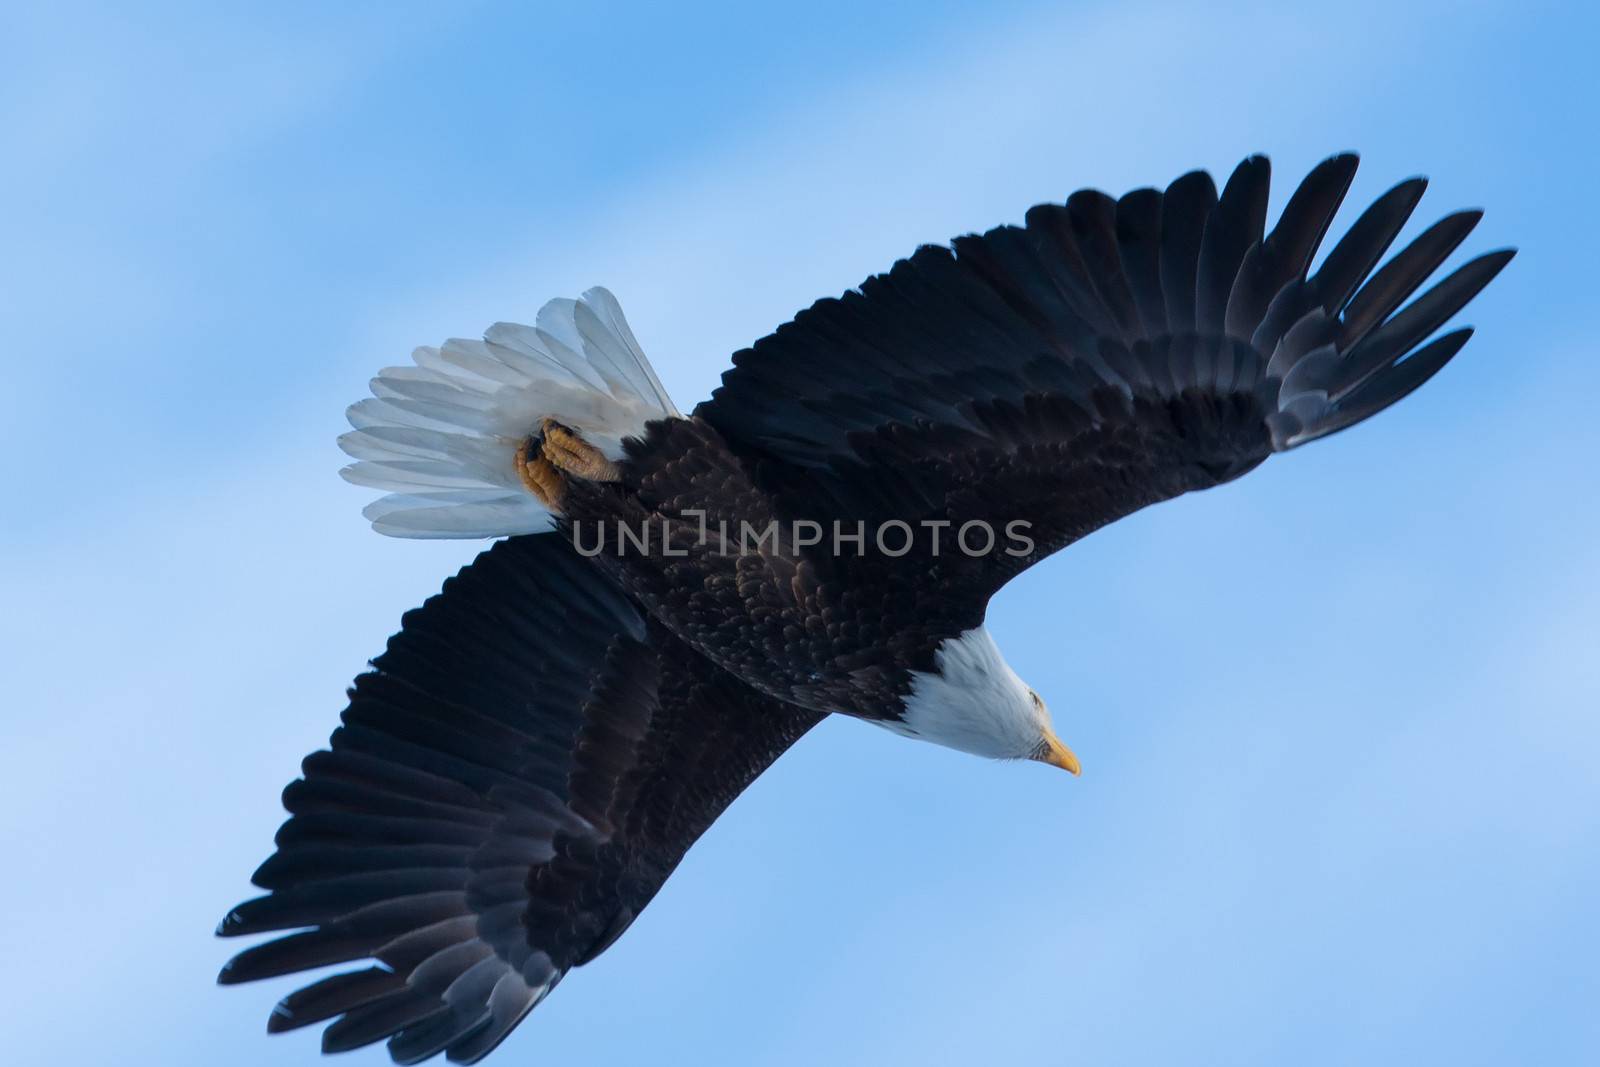 Image of an American Bald Eagle in Flight.